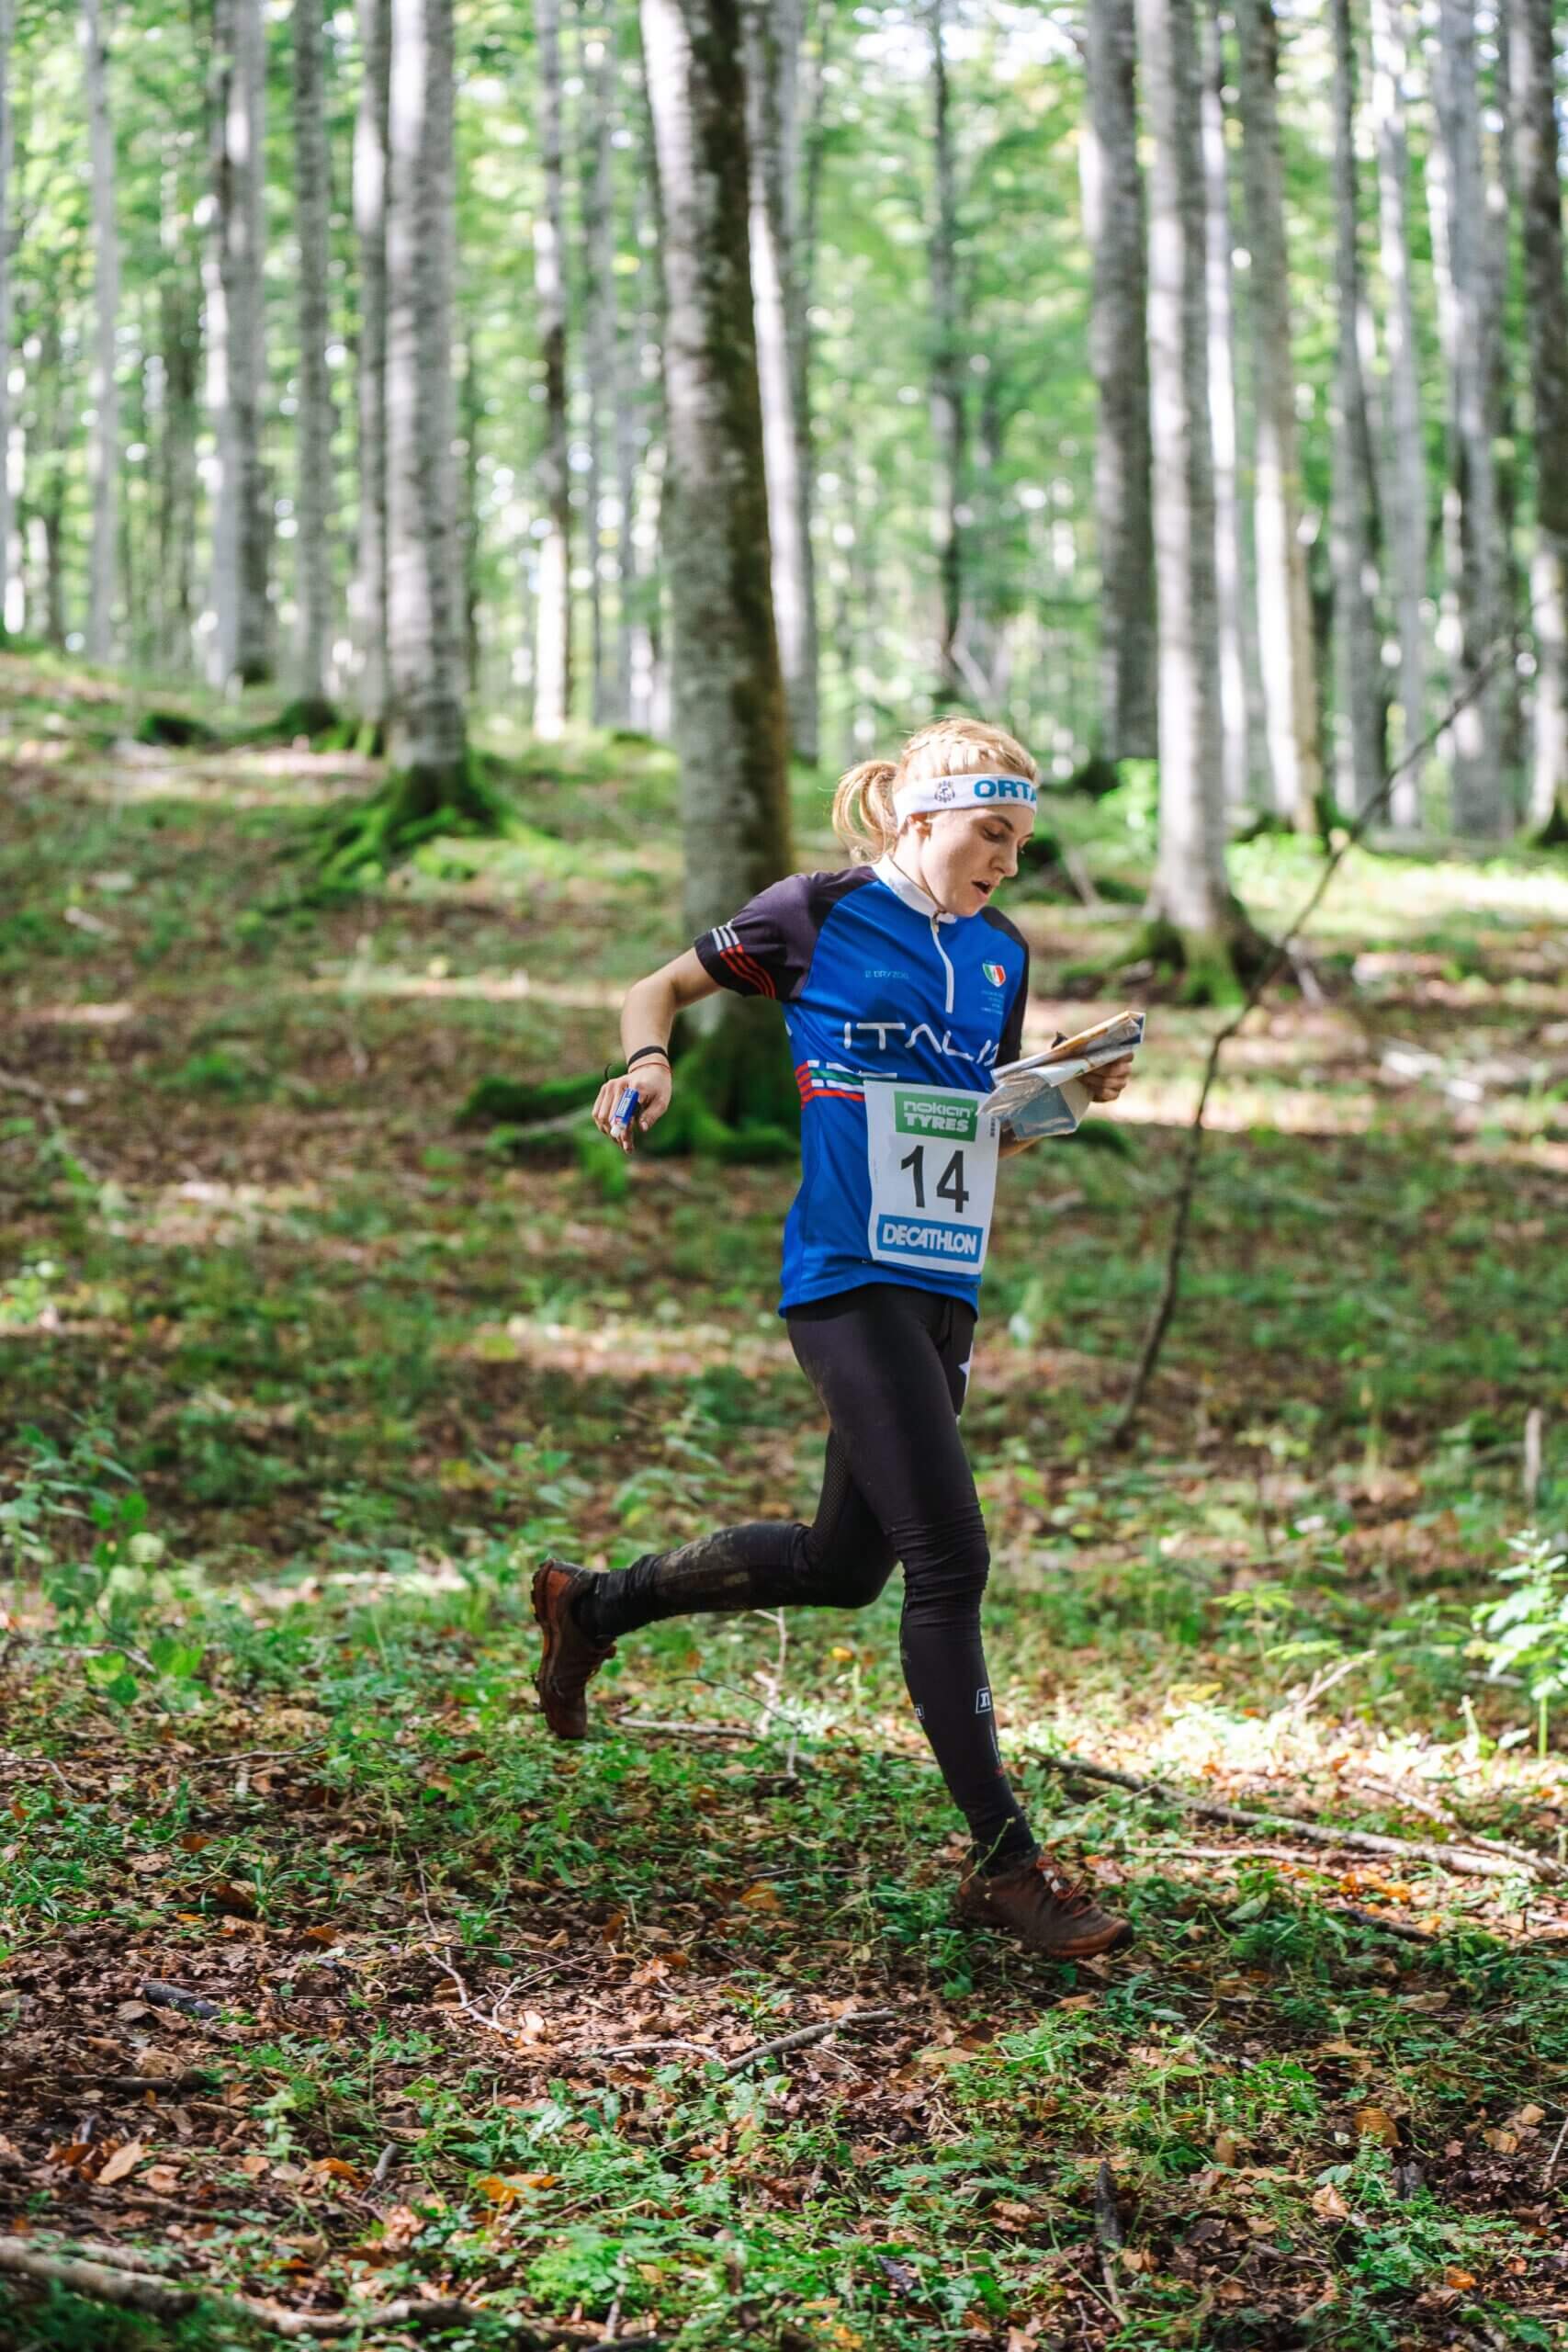 Orienteering Tarzo will organise the first edition of the Cansiglio Orienteering Meeting